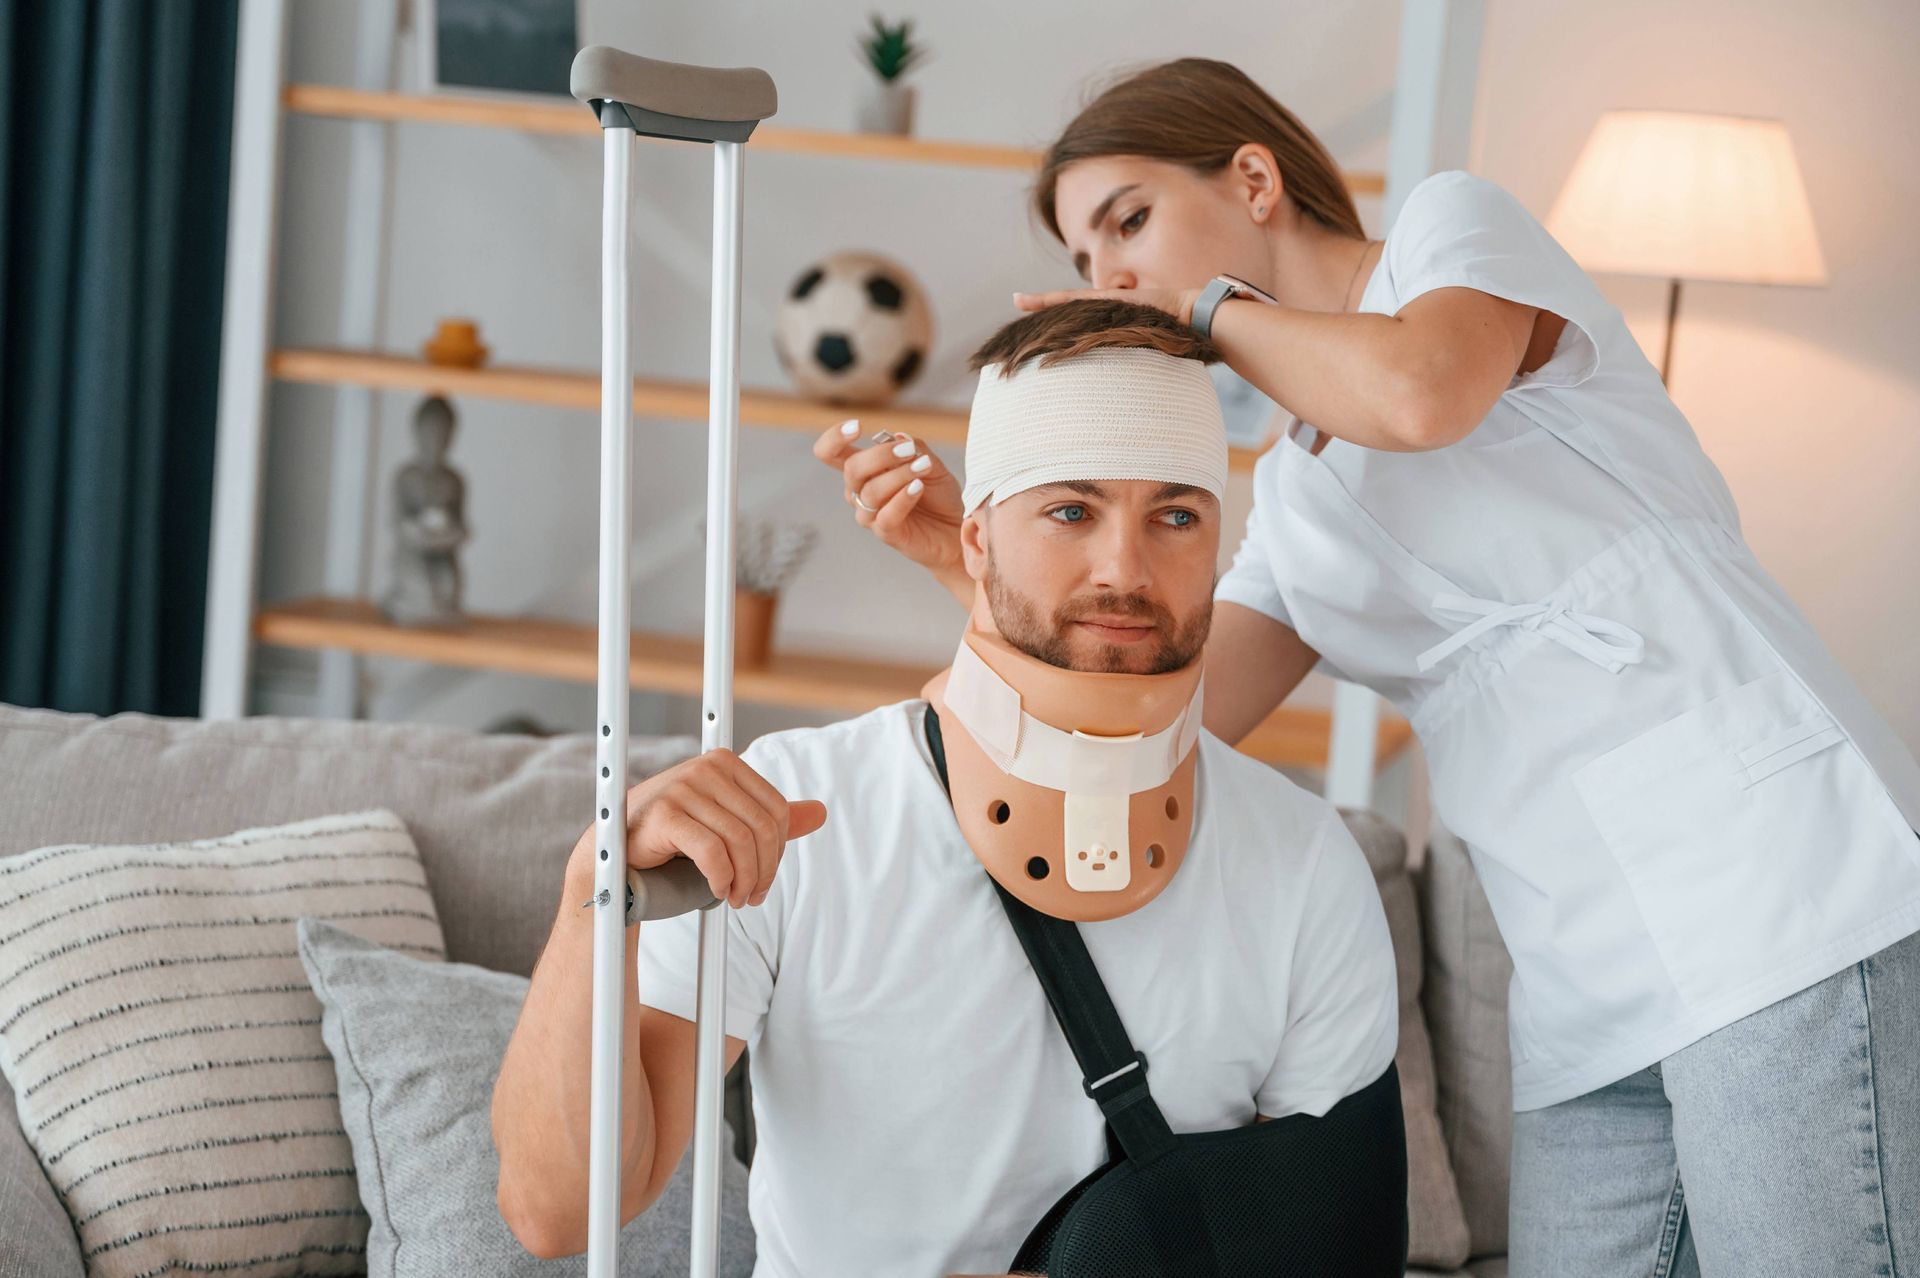 a woman is helping a man with a neck brace and crutches